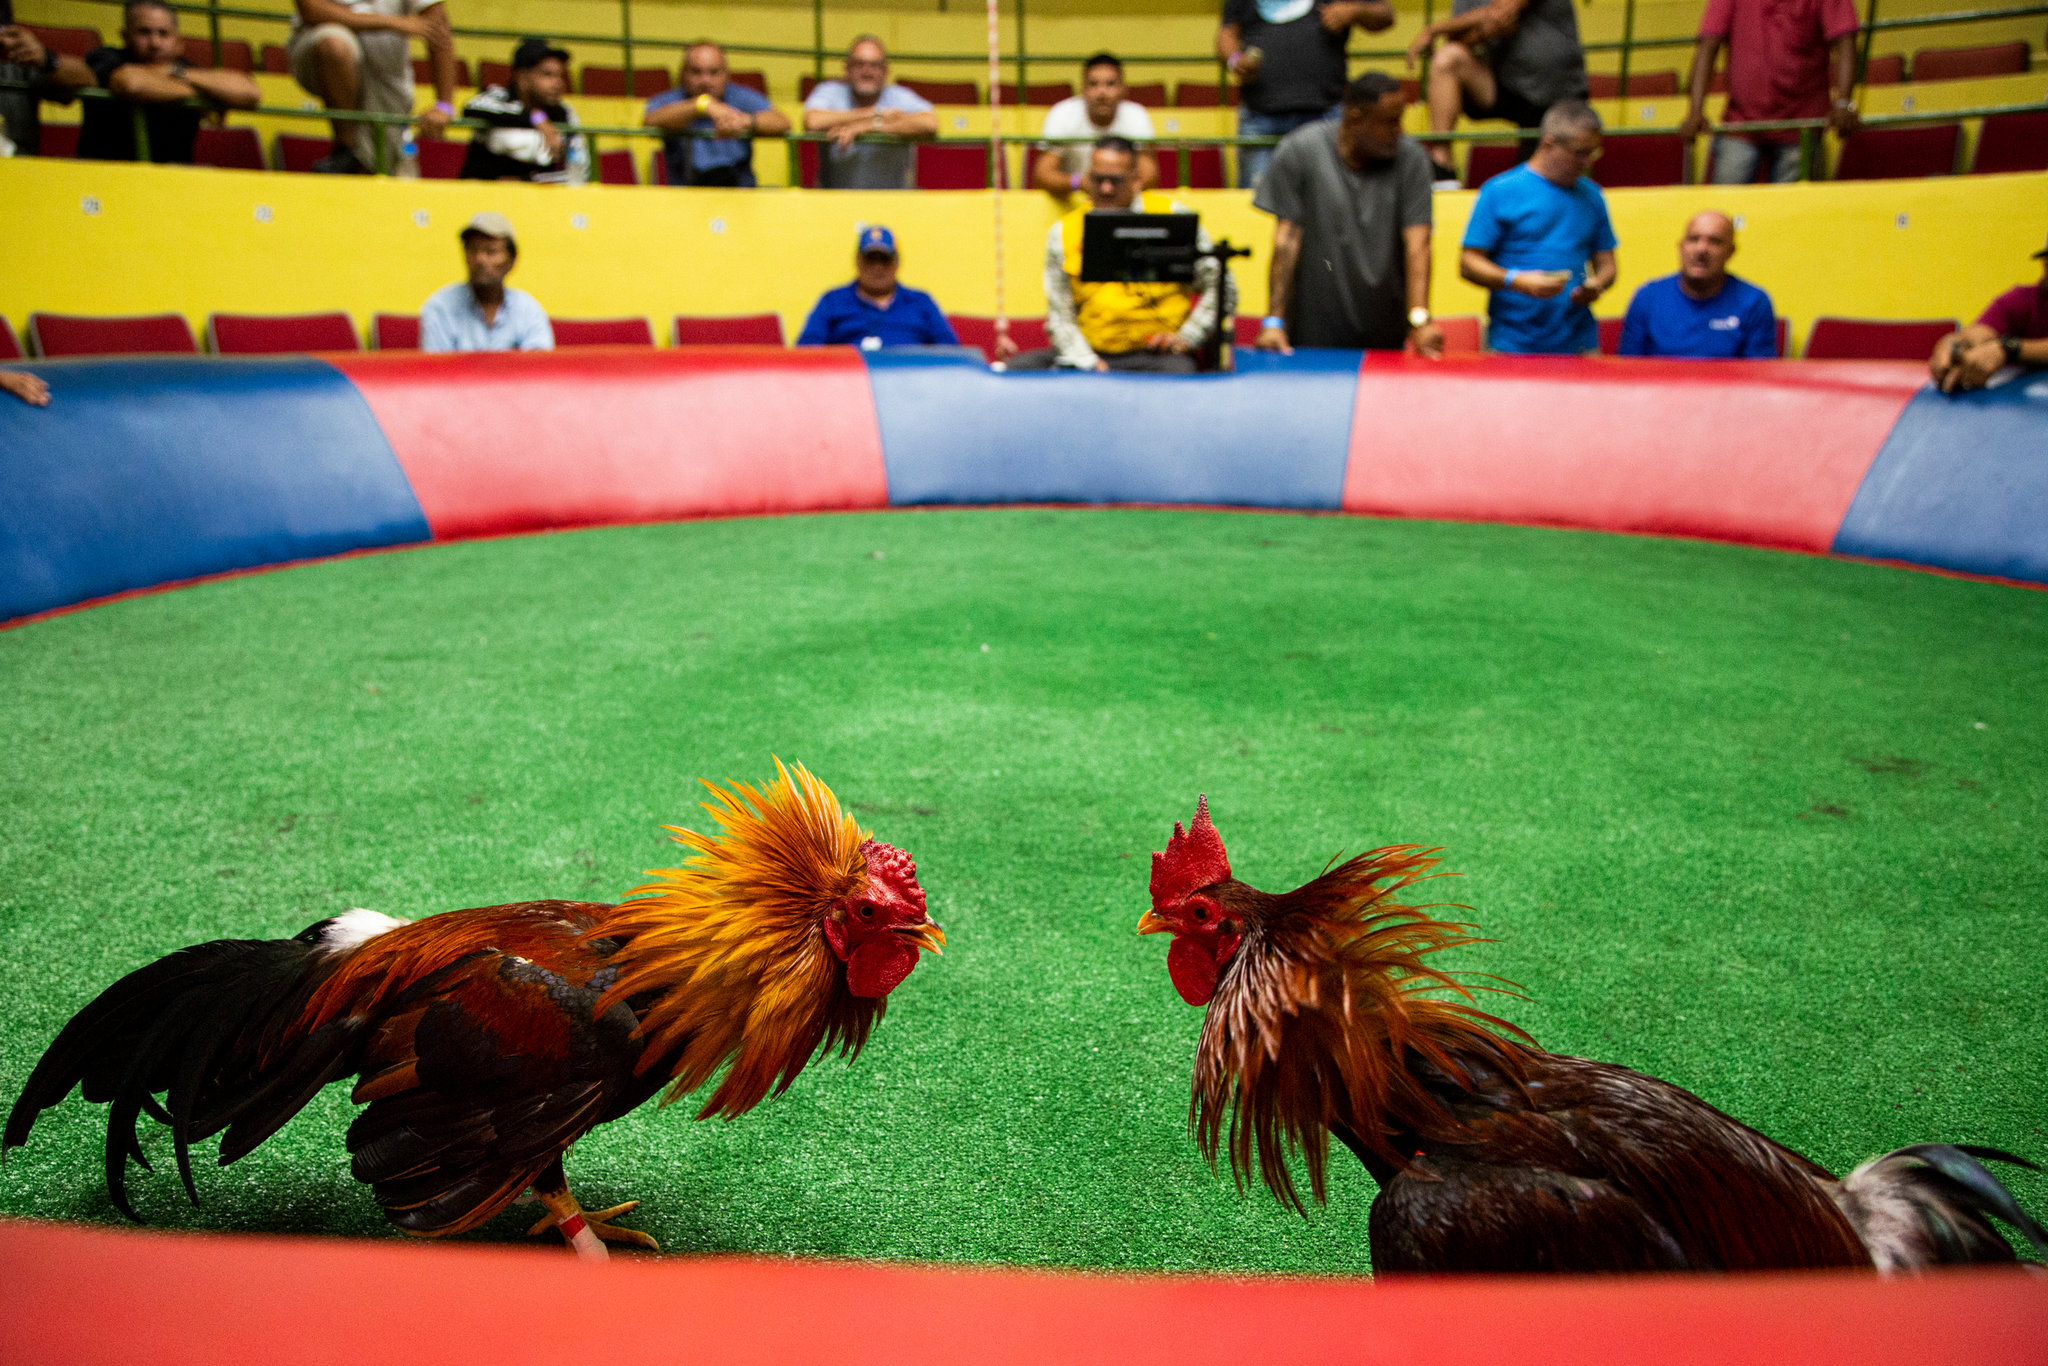 41 People Arrested At Illegal Cock-Fighting Event In Puerto Rico